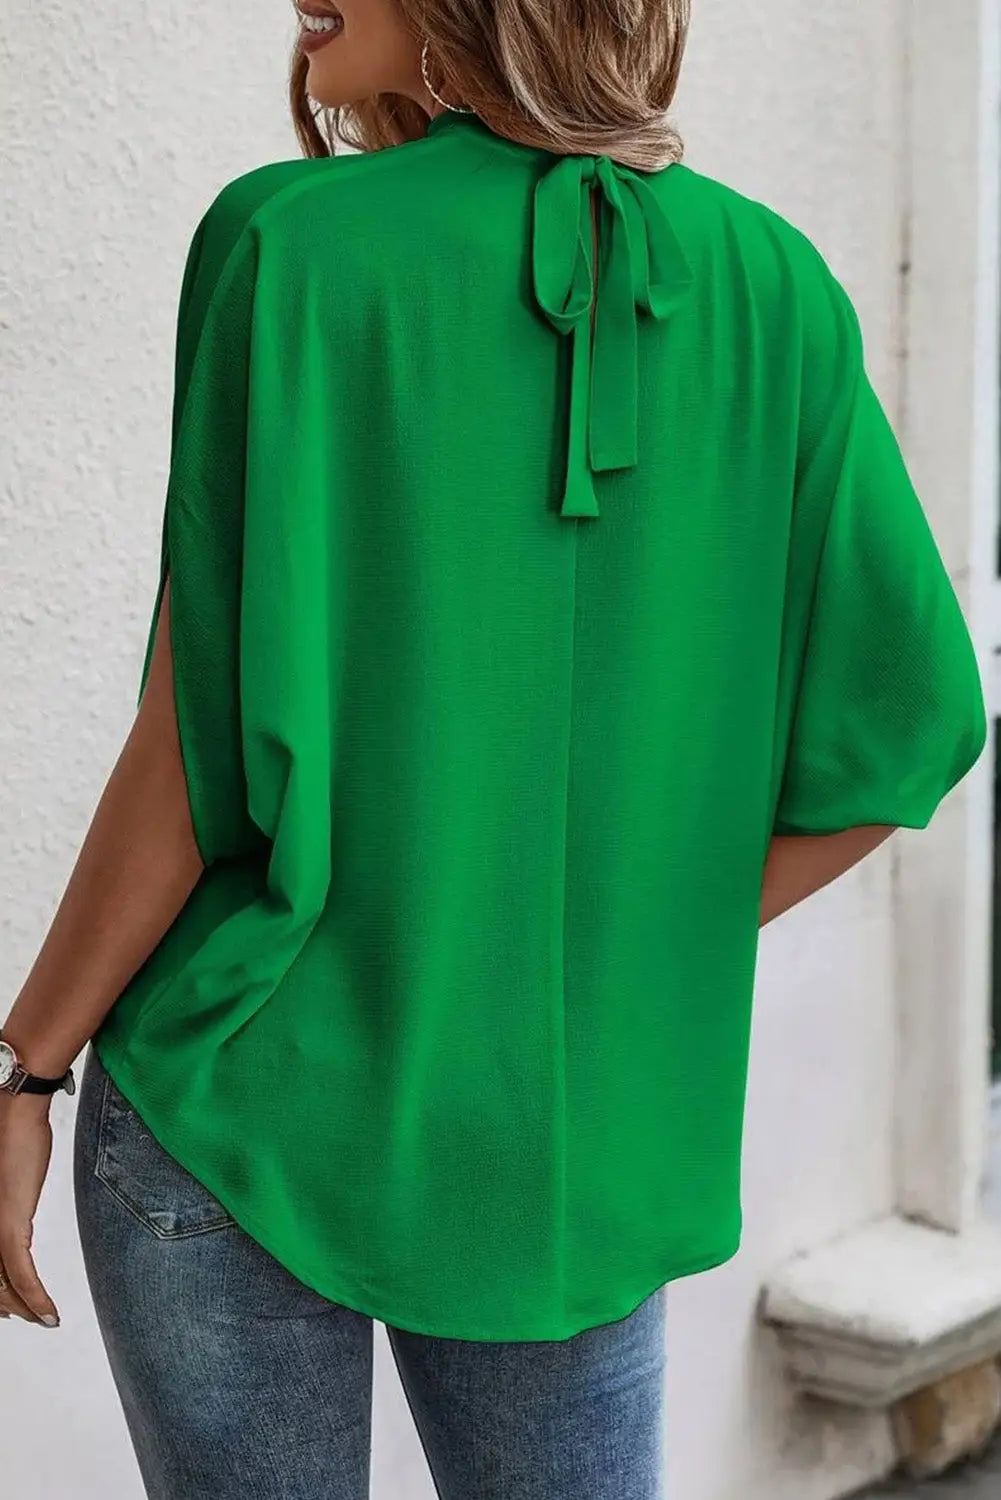 Bright green batwing sleeve blouse - s / 95% polyester + 5% elastane - tops/blouses & shirts